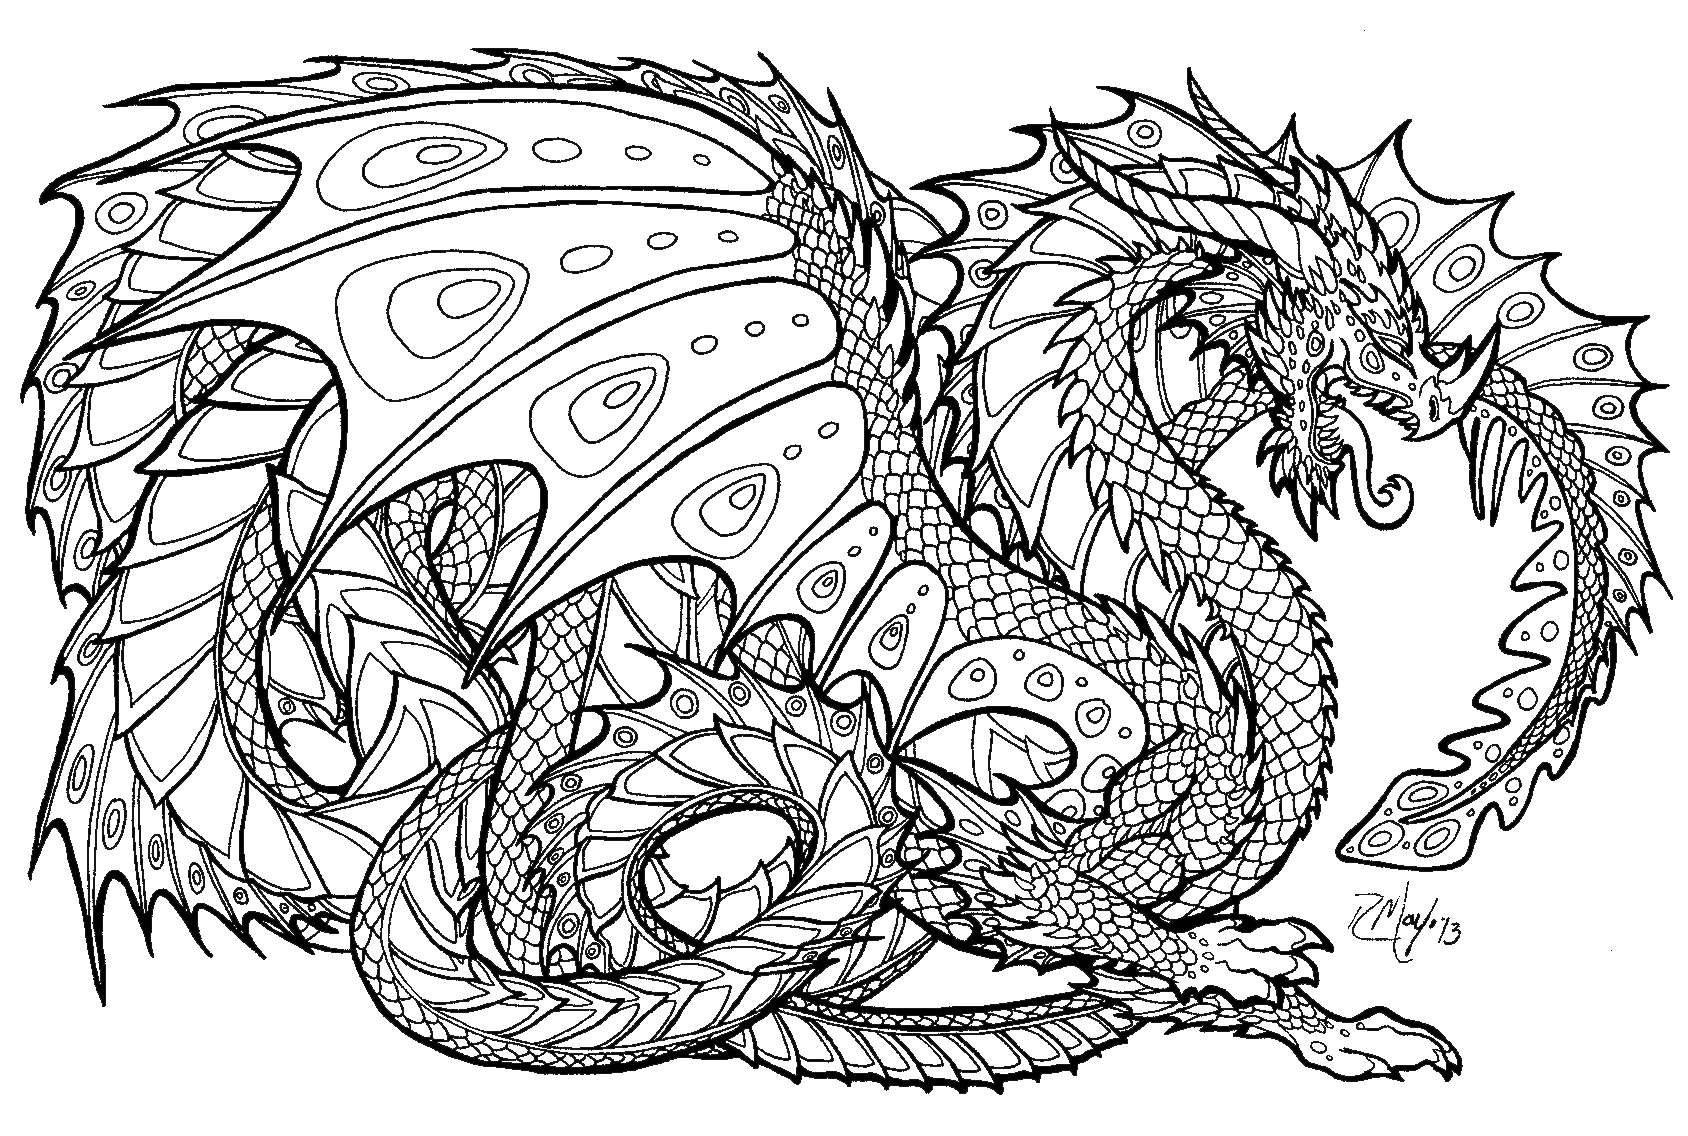 Cool Dragon 1 Coloring Page